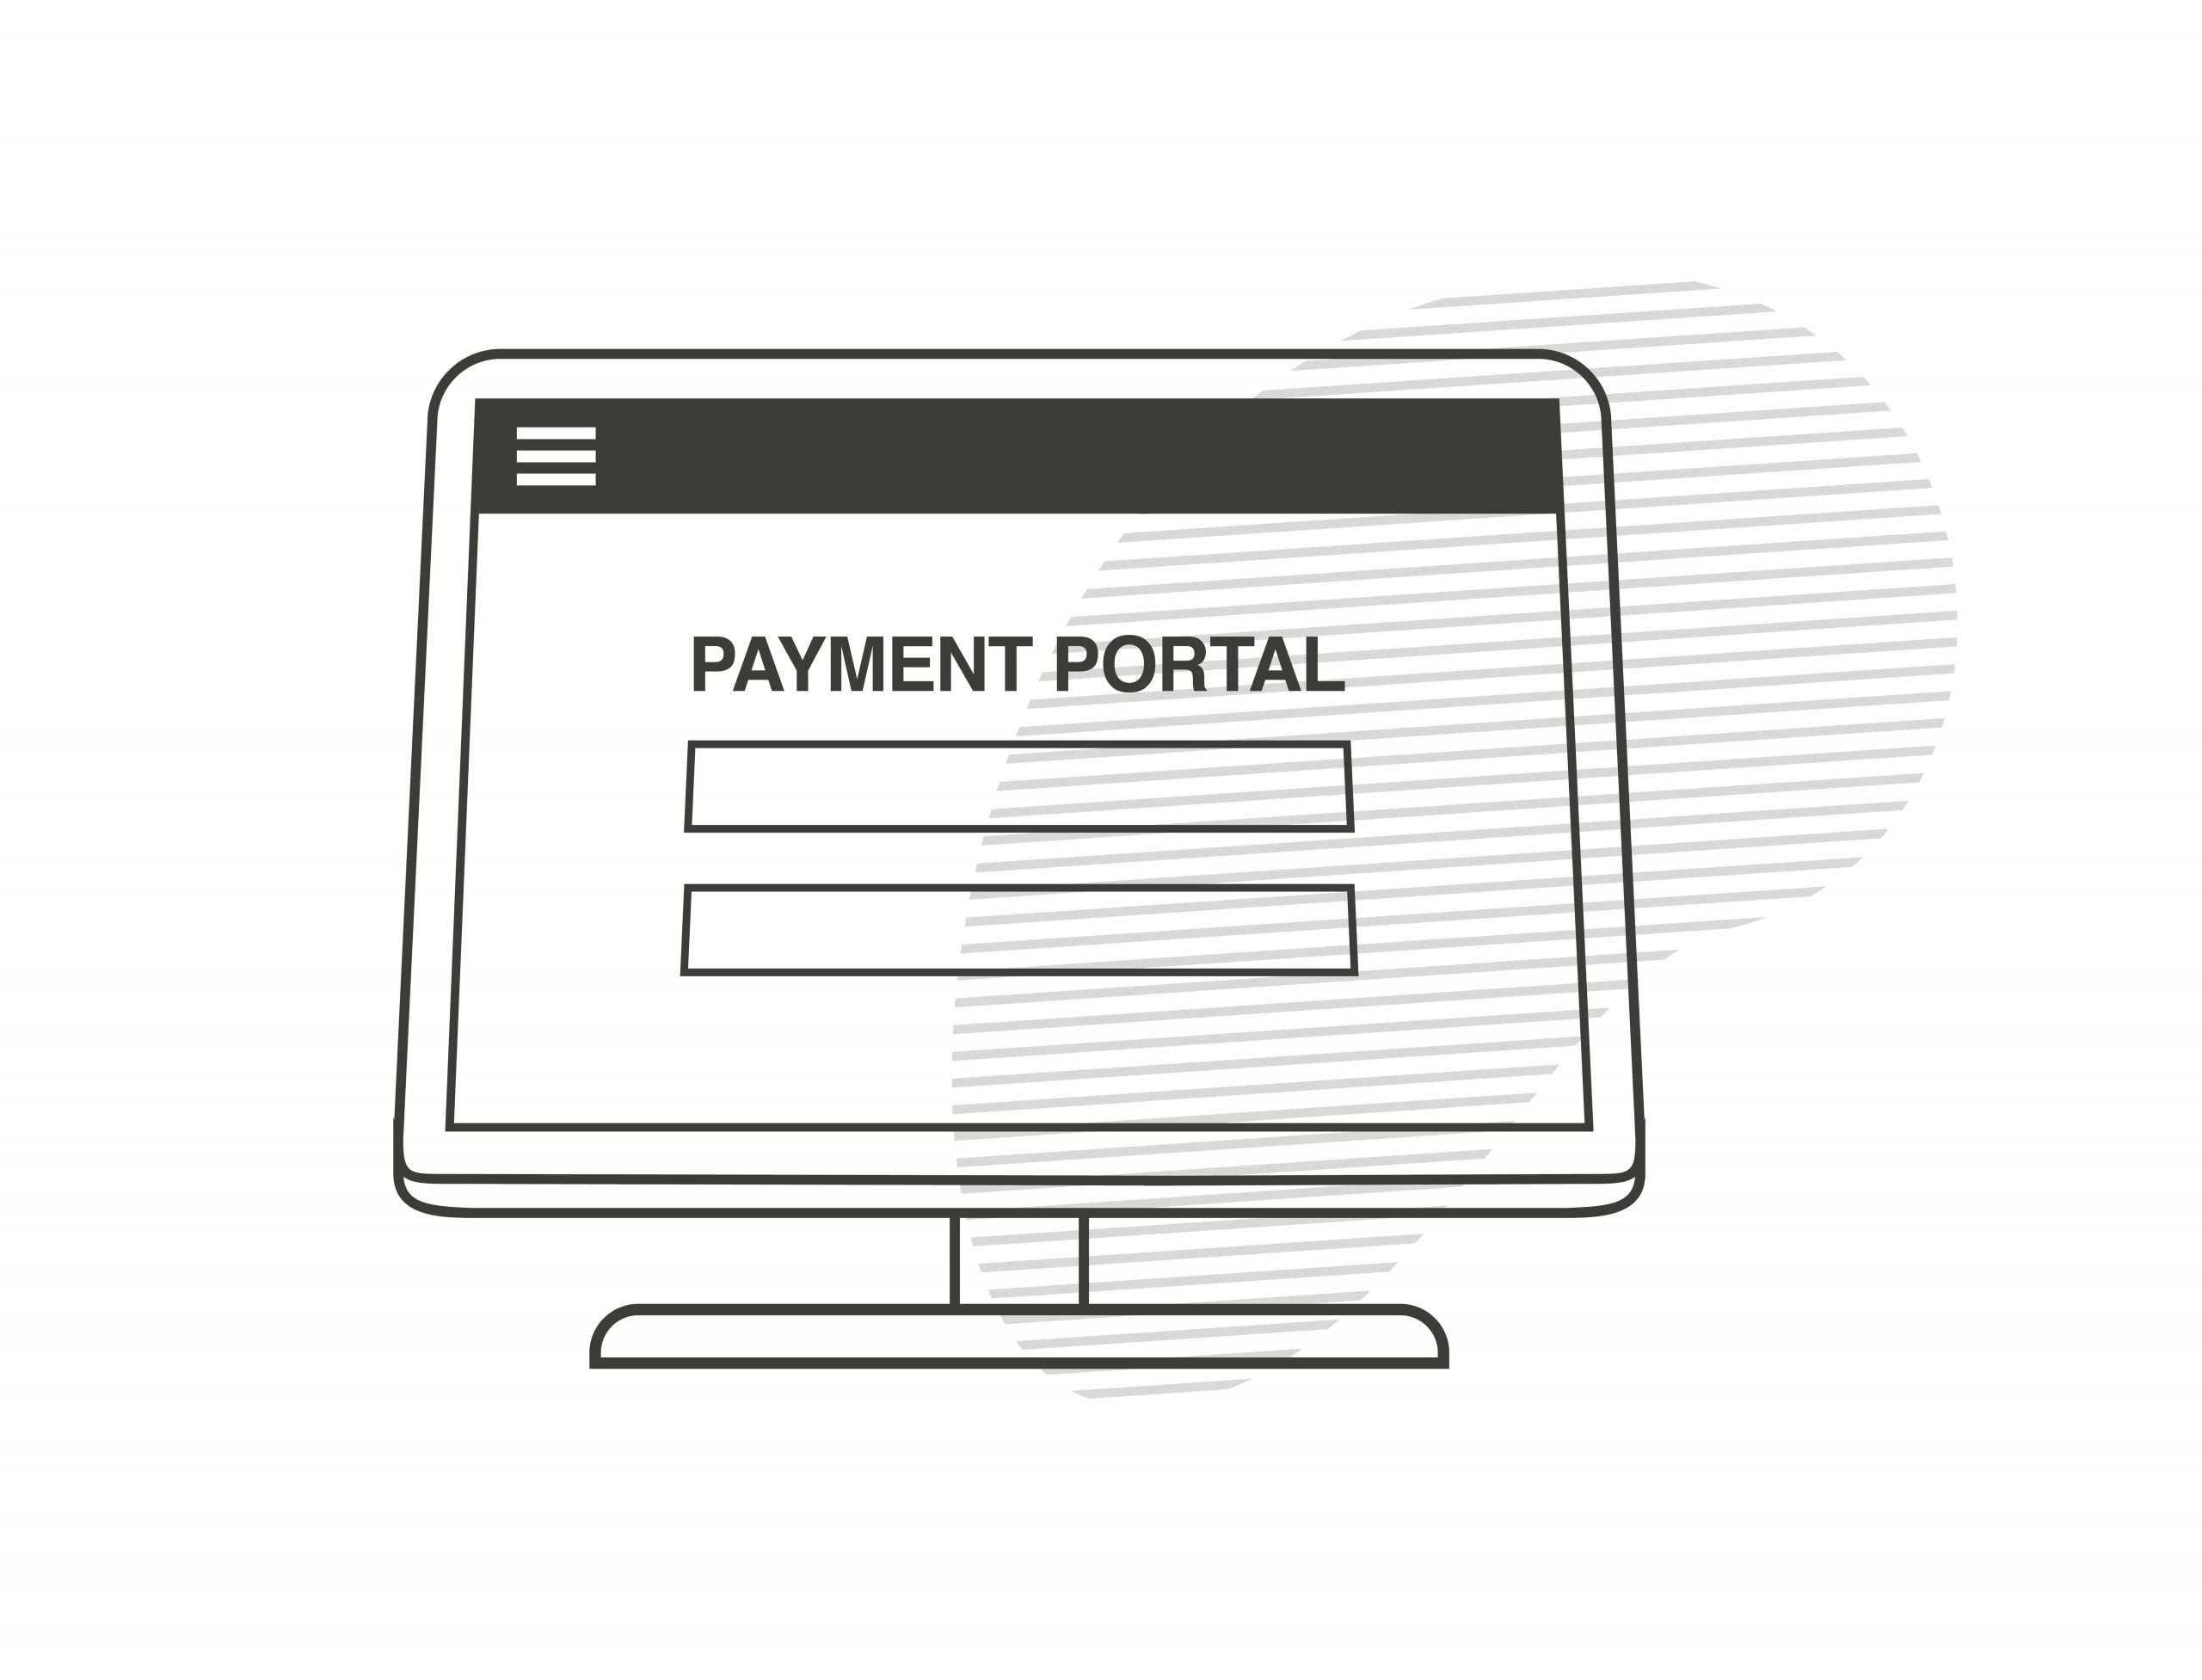 kamasys graphic payment portal